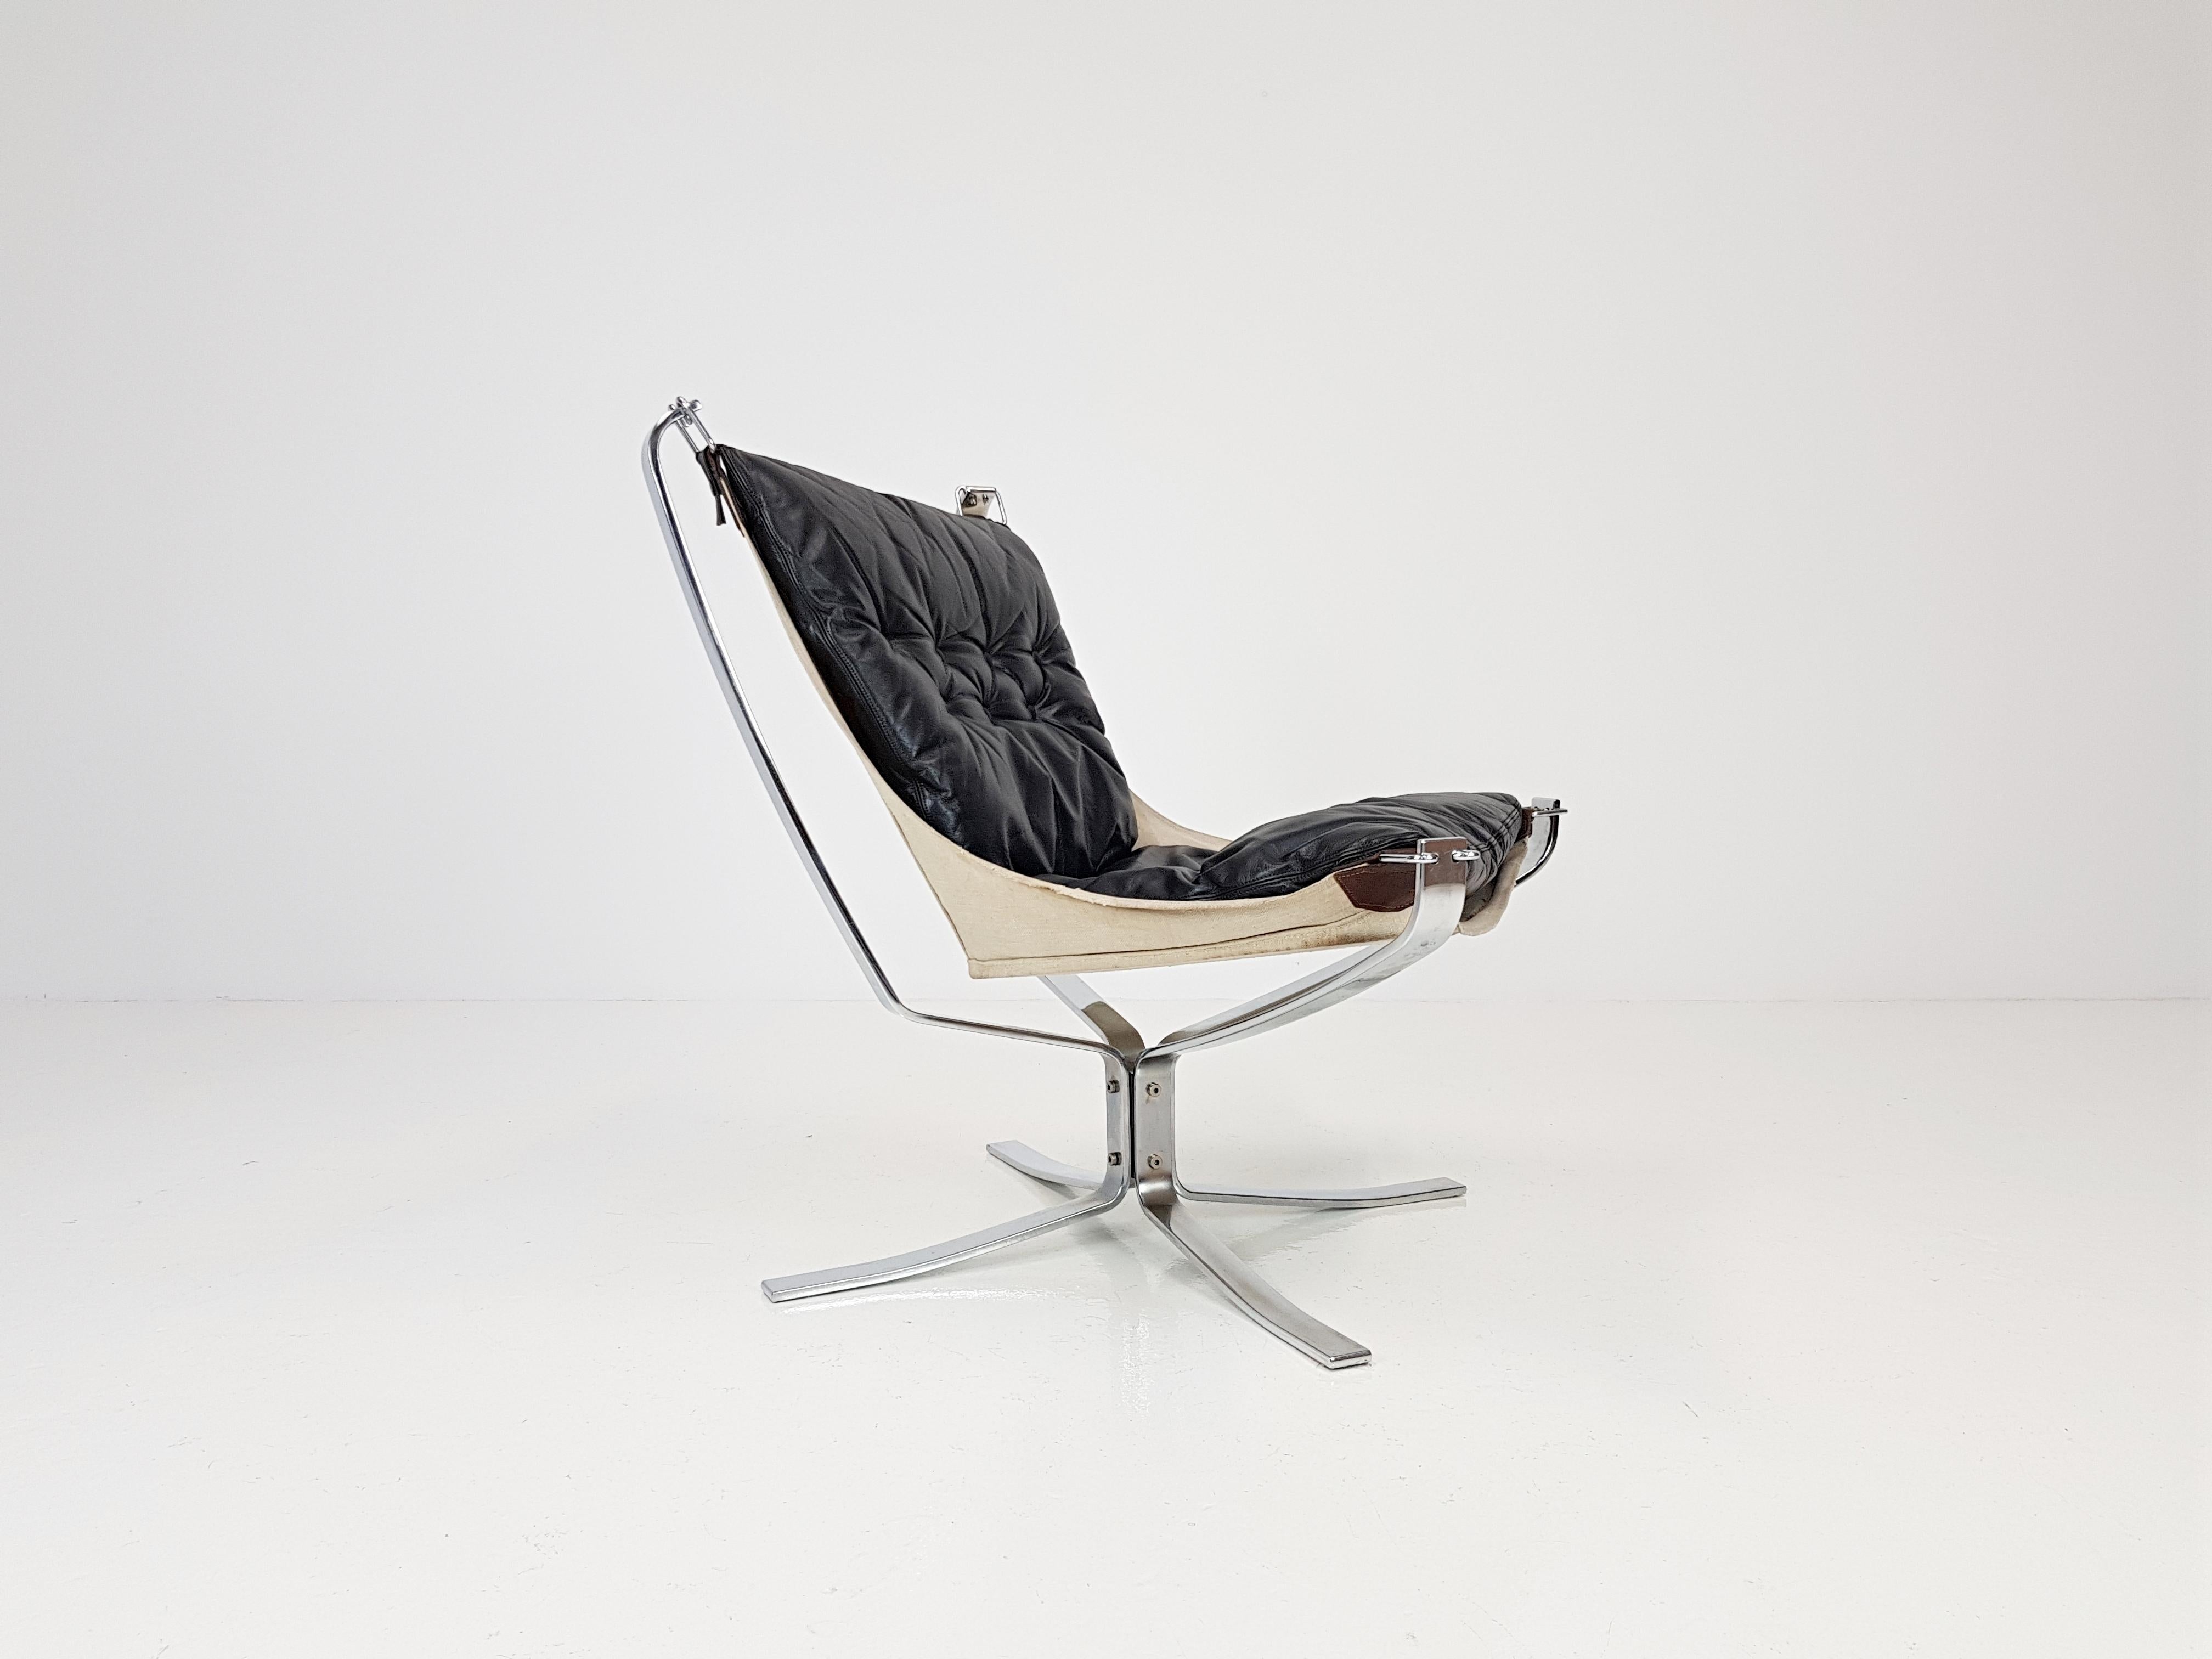 Iconic vintage low-backed X framed Sigurd Ressell designed 1970s Falcon chair on chrome-plated steel base.

A super comfortable, amazing looking 1970s Sigurd Ressell designed iconic Falcon chair. X framed with hammock design. 

A stunning